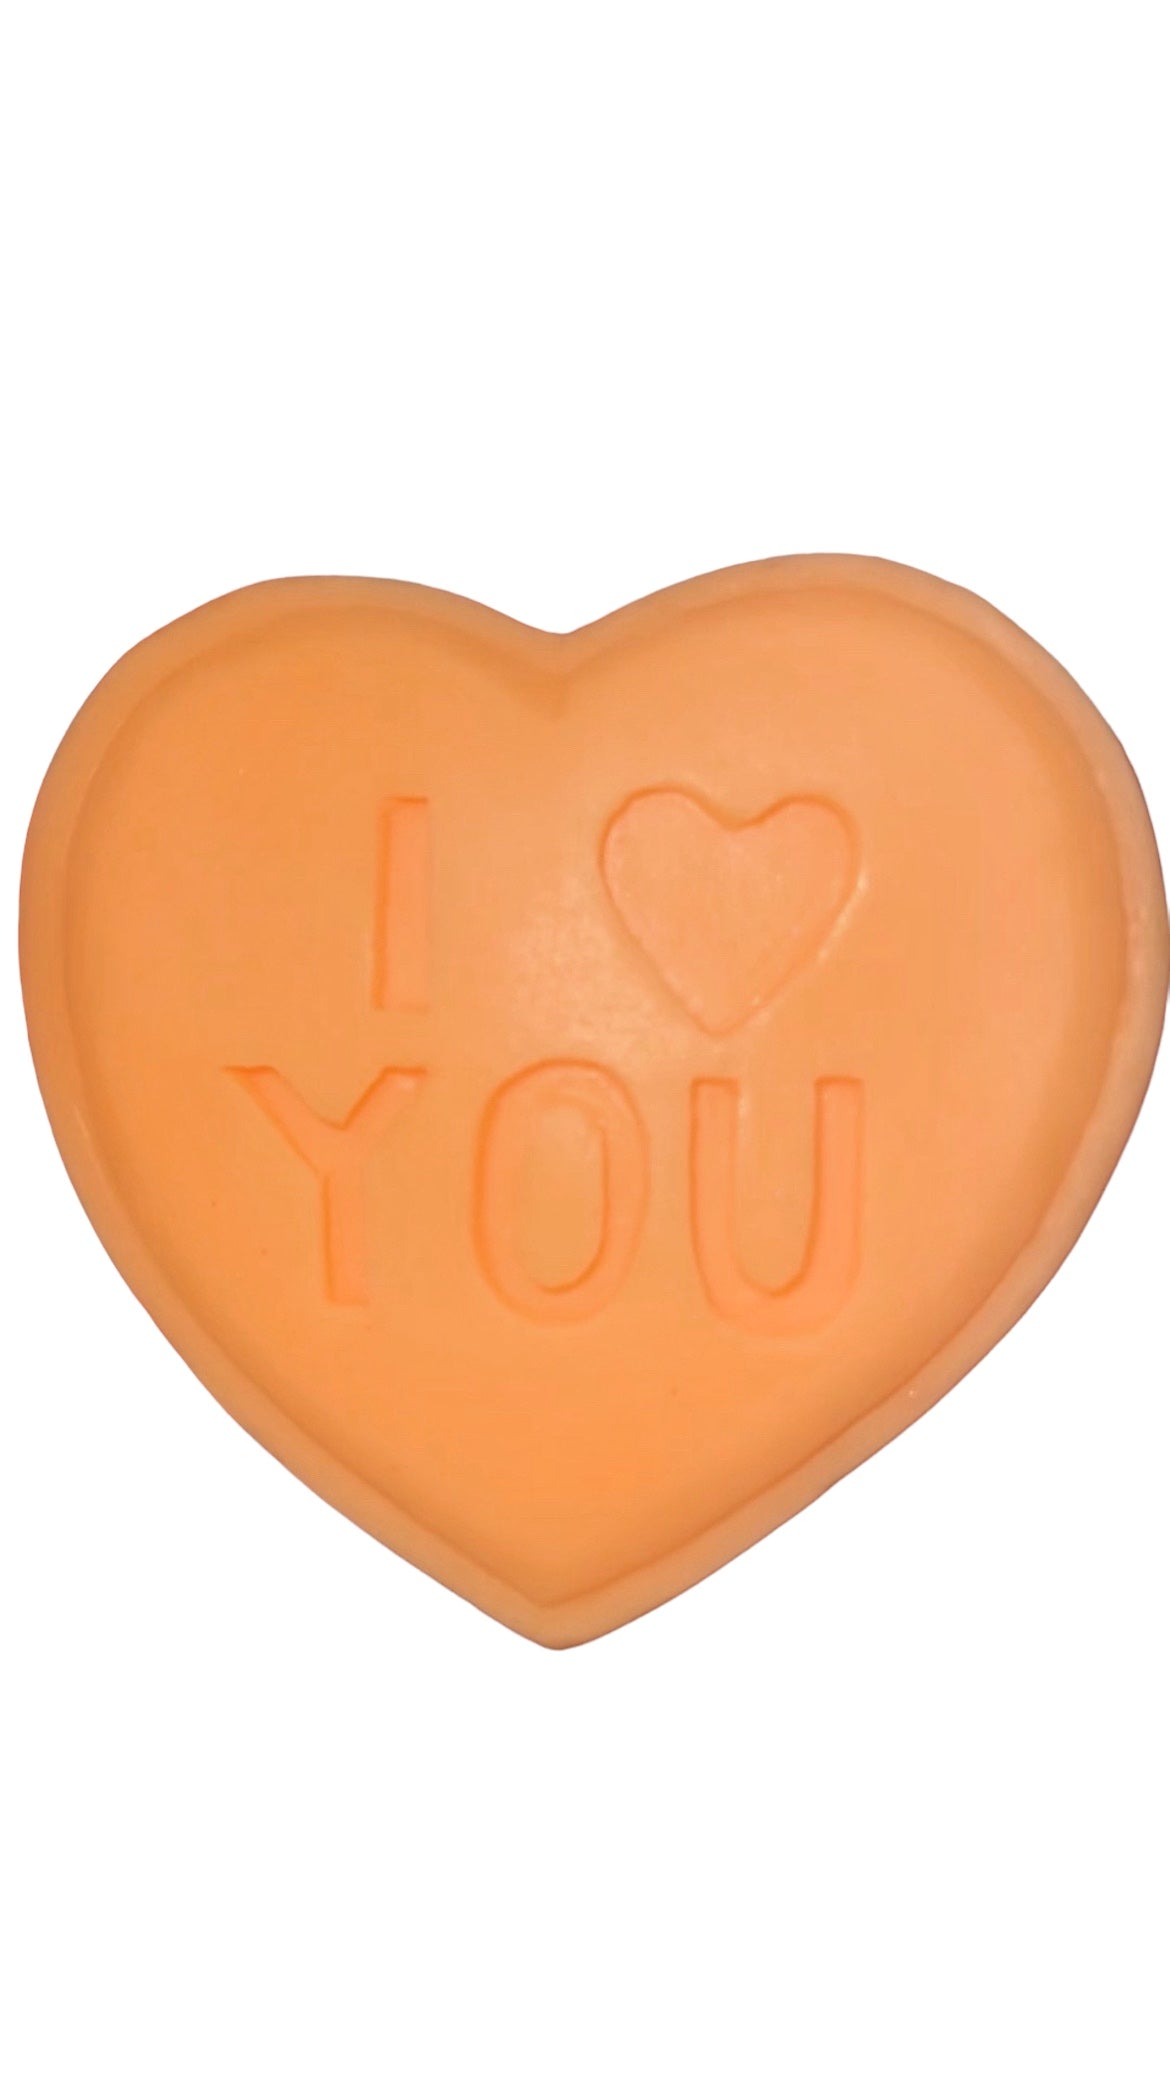 “I LOVE YOU” Hair and body soap bars